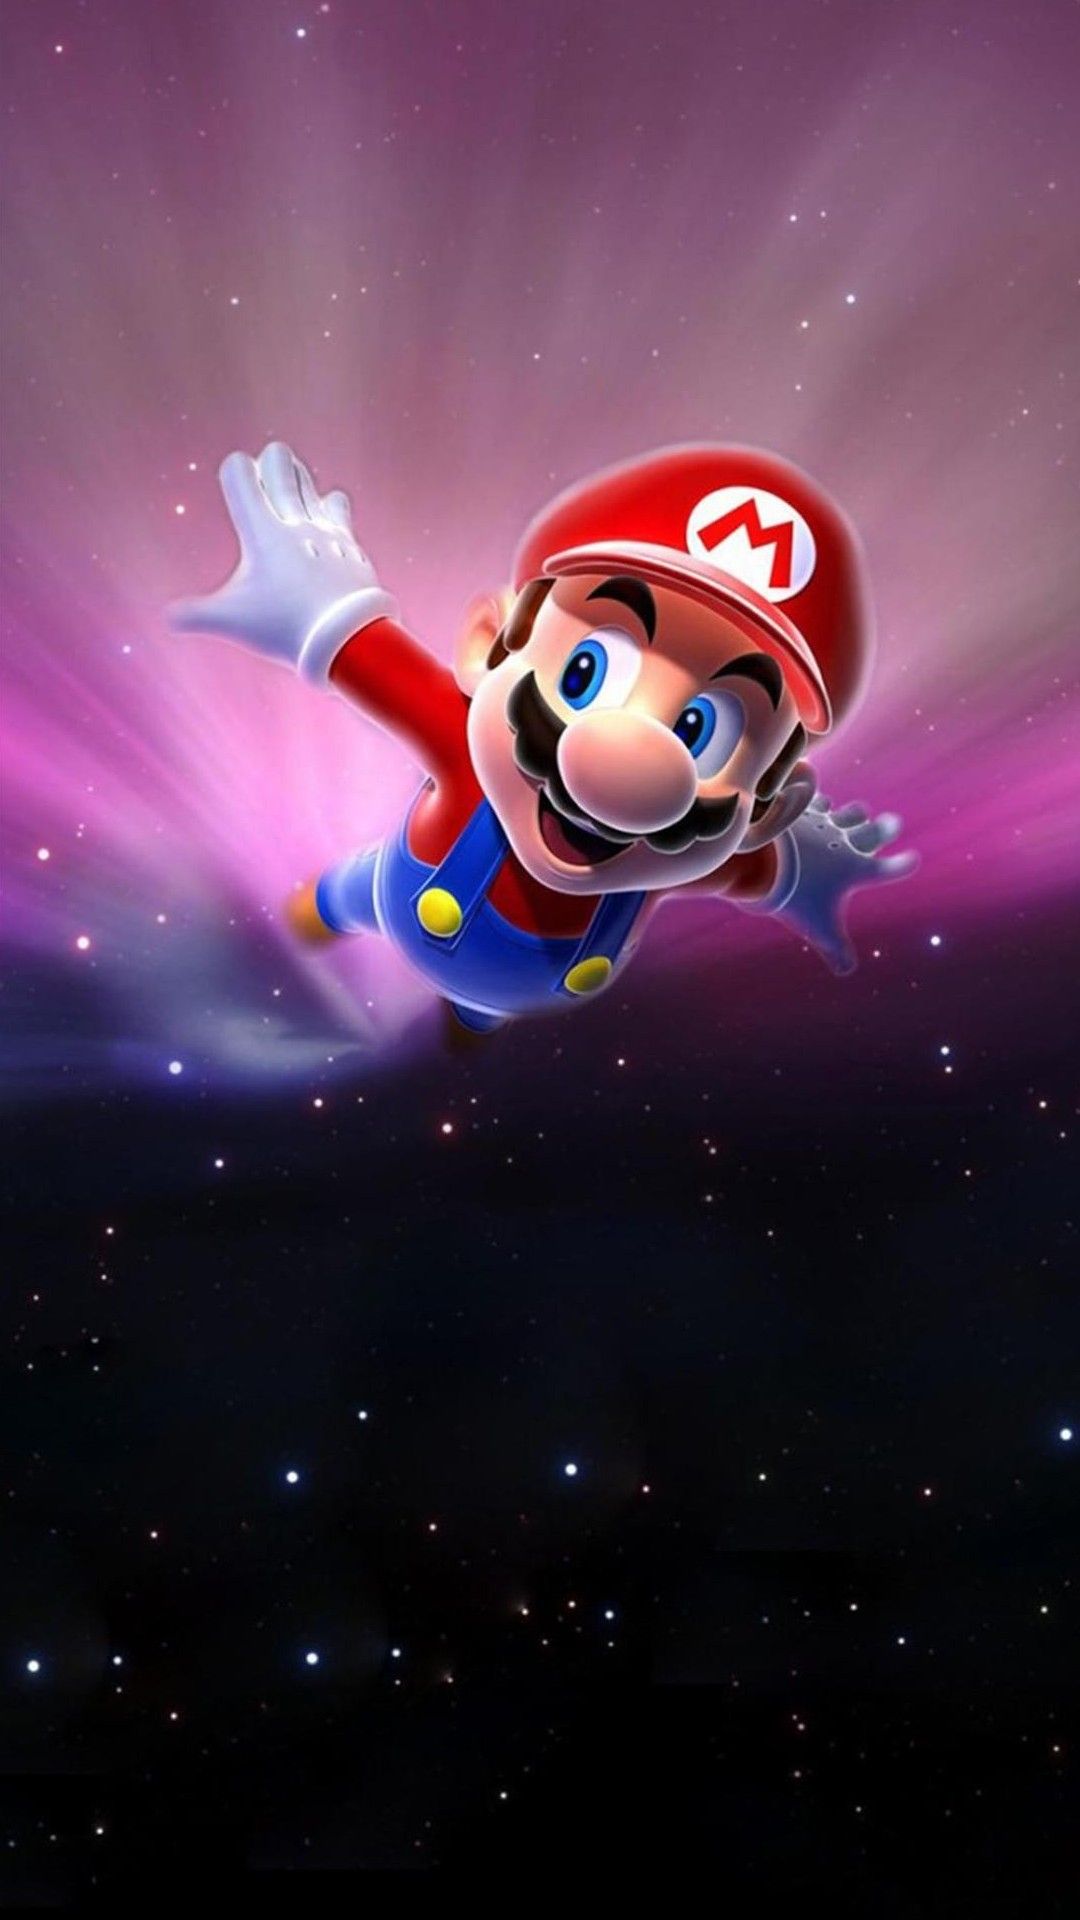 Super MarioK wallpaper, free and easy to download